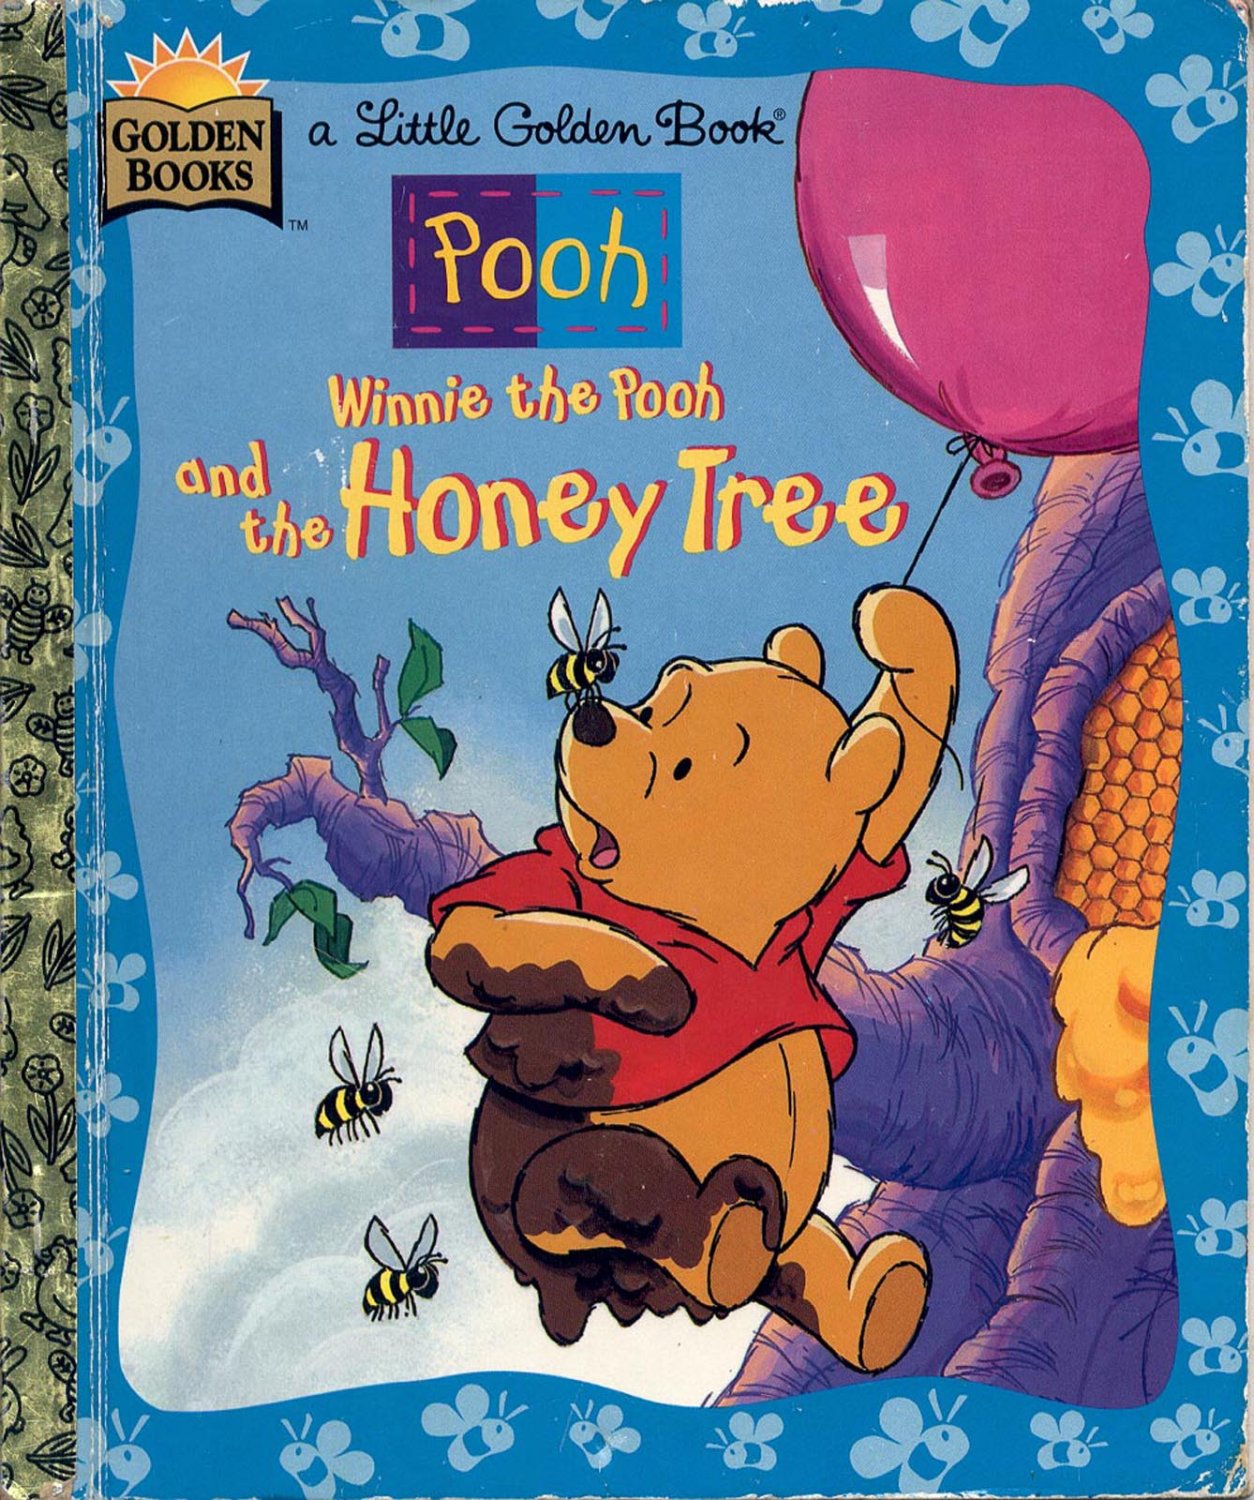 List 105+ Images winnie the pooh and the honey tree book Updated